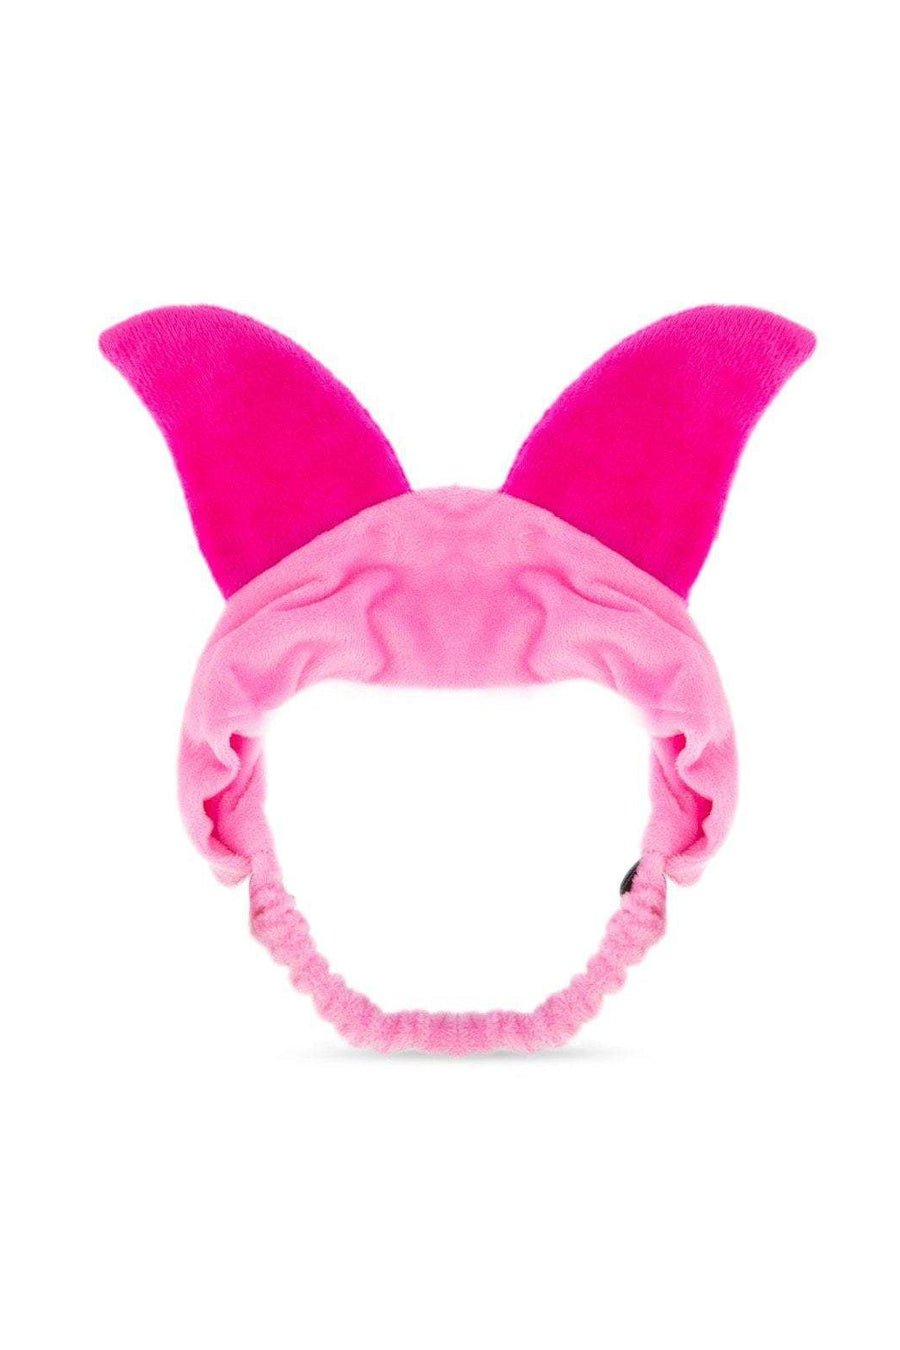 Shop Disney Winnie The Pooh Headband - Premium Beauty Kit from Mad Beauty Online now at Spoiled Brat 